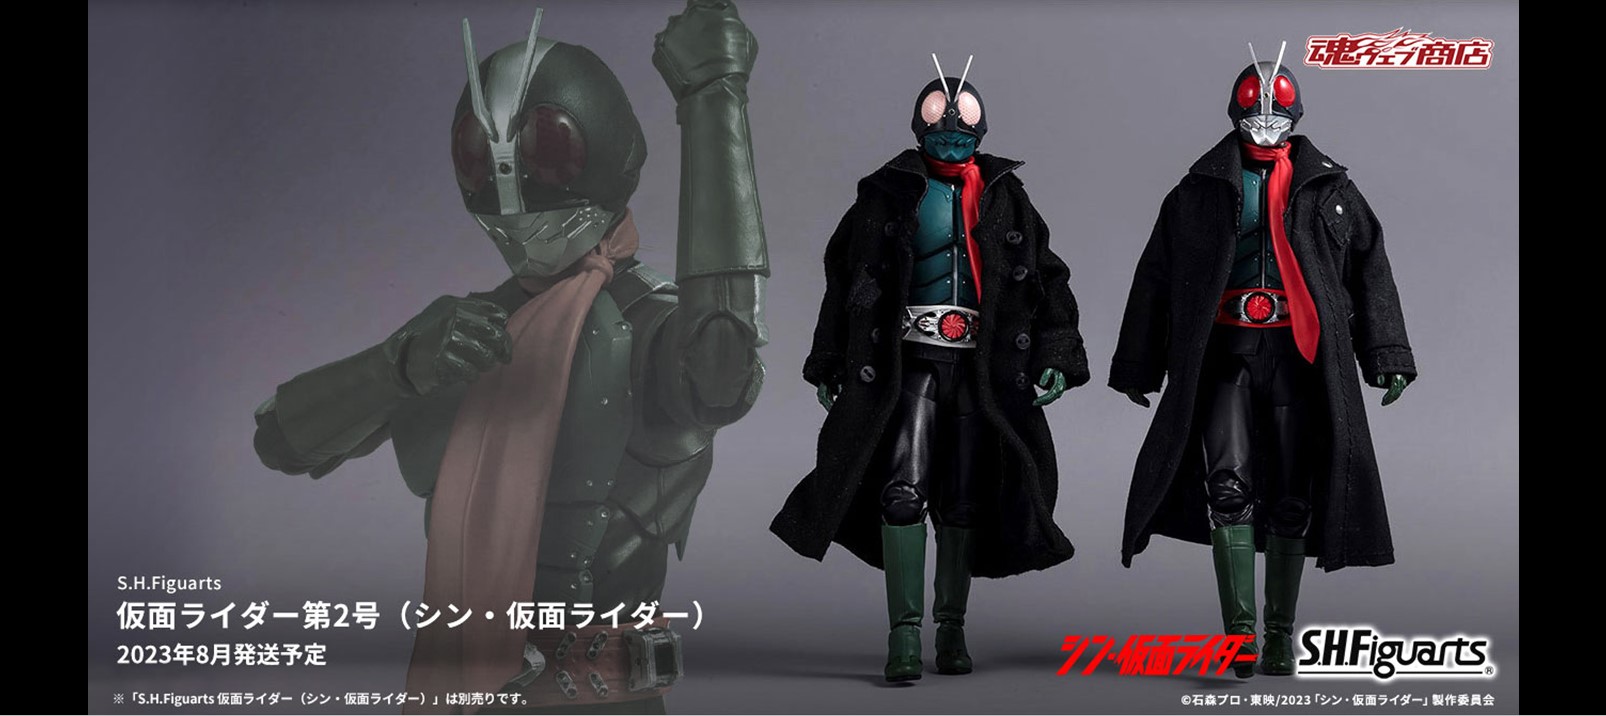 S.H.Figuarts 仮面ライダー第2号（シン・仮面ライダー）が商品化決定